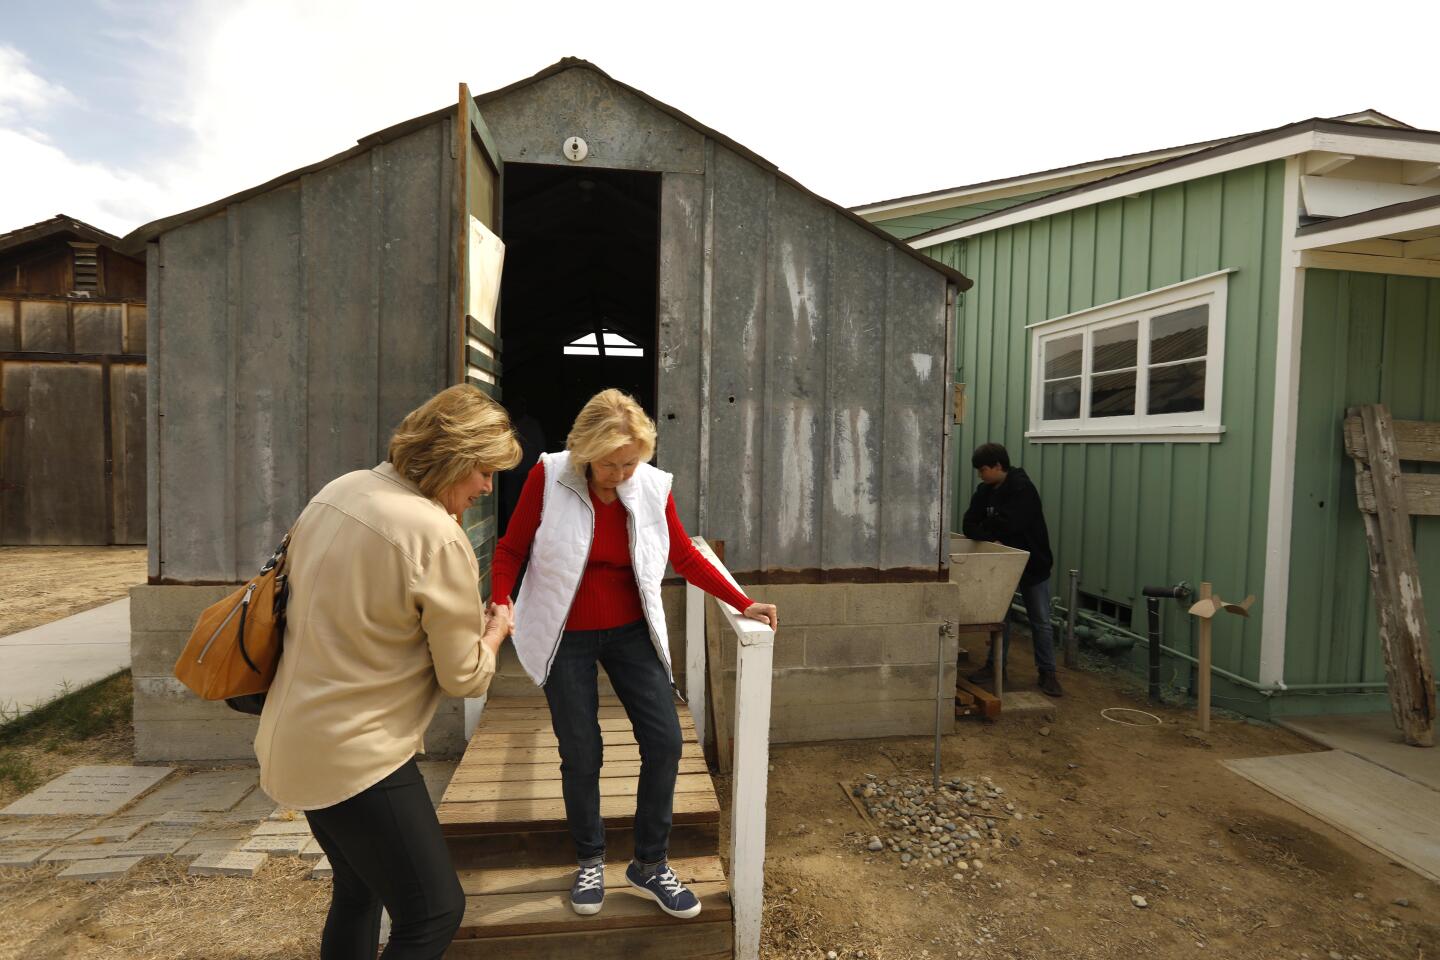 BAKERSFIELD, CA - OCTOBER 19, 2019 - - Pat Rush, 84, with the help of her daughter Angie Trigueiro, , exits one of the structures she and her family used to live in after migrating from Oklahoma to Bakersfield in 1945. Rush was revisiting the Weedpatch Camp with her daughter in Bakersfield on October 19, 2019. After three decades, the Dust Bowl Days festival at Weedpatch Camp, which housed Okies and migrant workers during the Dust Bowl, is ending its run. The final festival celebrates Okie history. (Genaro Molina / Los Angeles Times)